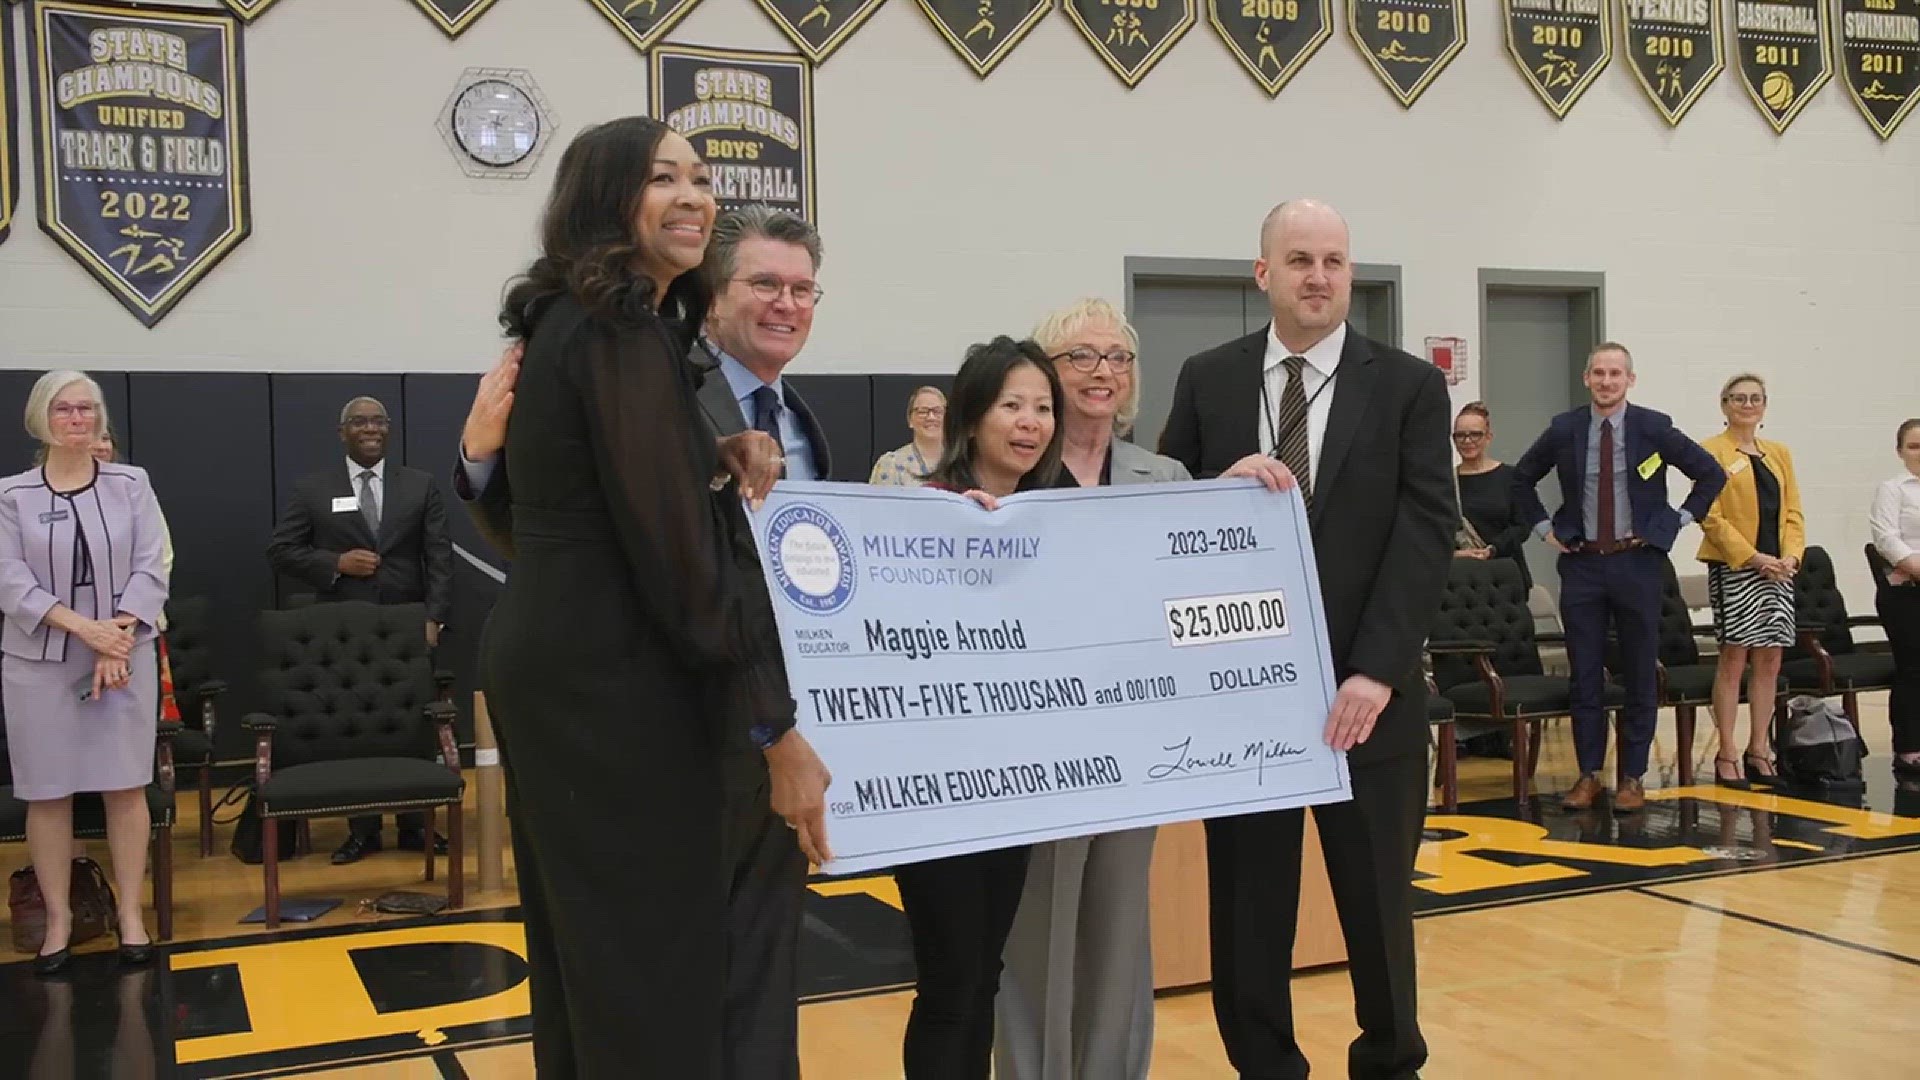 On Thursday, Maggie Arnold received the Milken Educator Award for her outstanding dedication to excellence in education for the work she’s done at Frederick H.S.